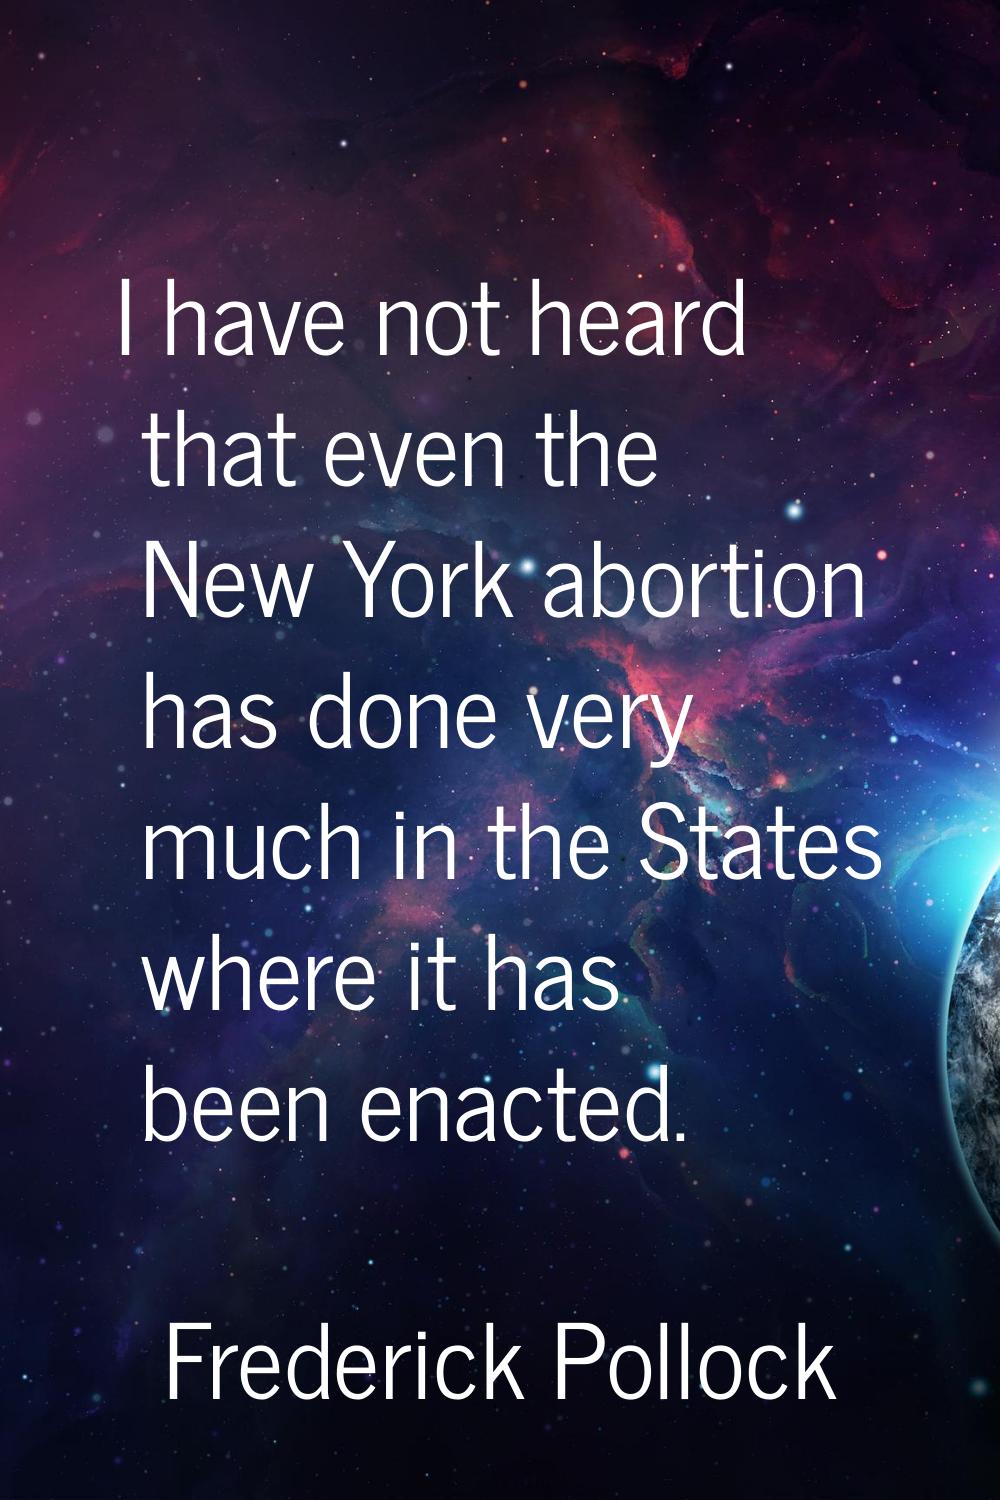 I have not heard that even the New York abortion has done very much in the States where it has been